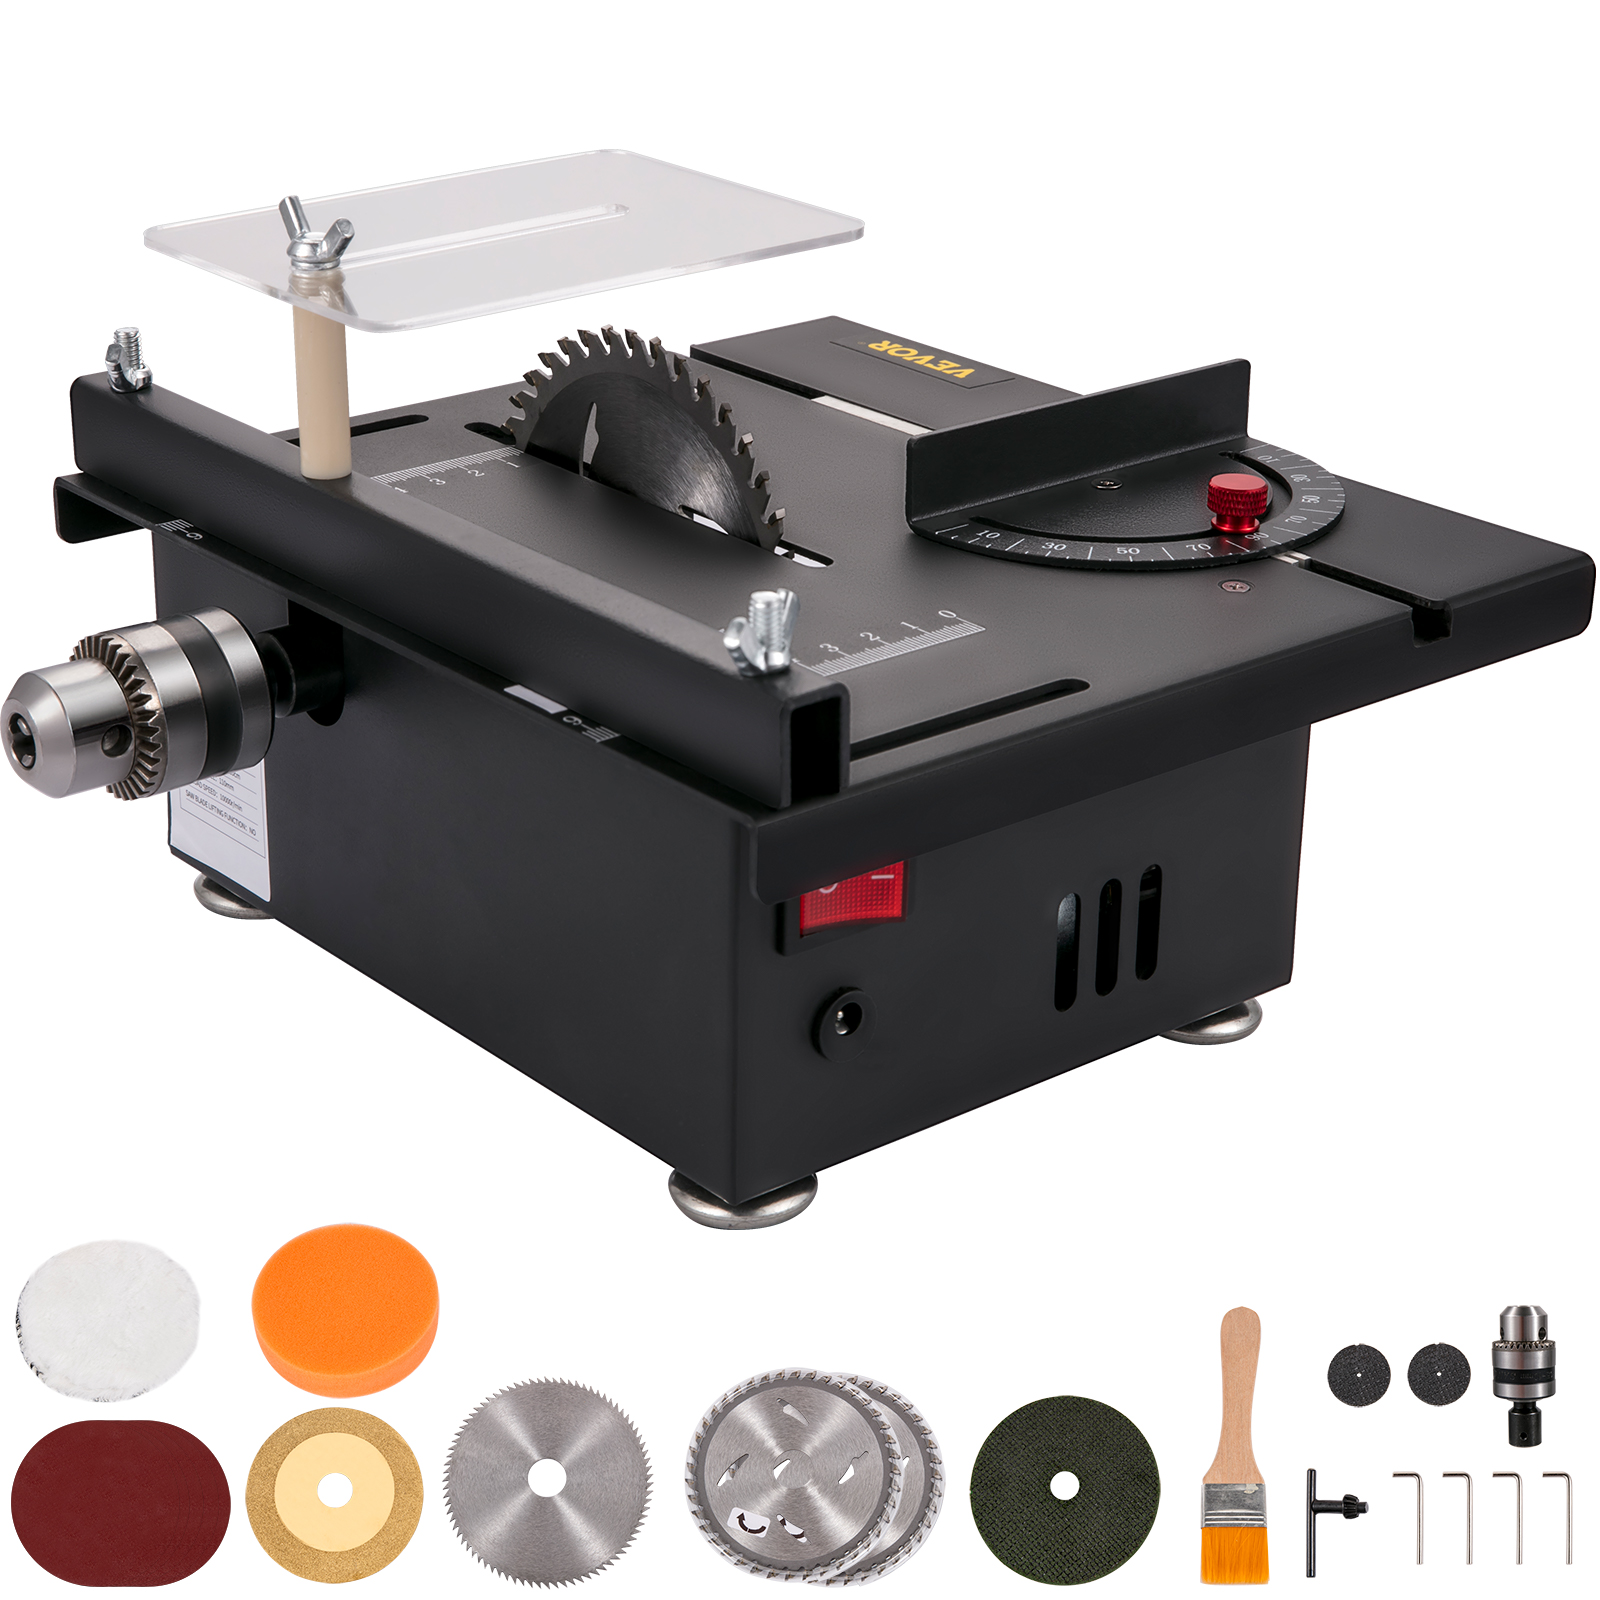 https://d2qc09rl1gfuof.cloudfront.net/product/MNMGTJYKL220V84OW/mini-table-saw-m100-1.2.jpg